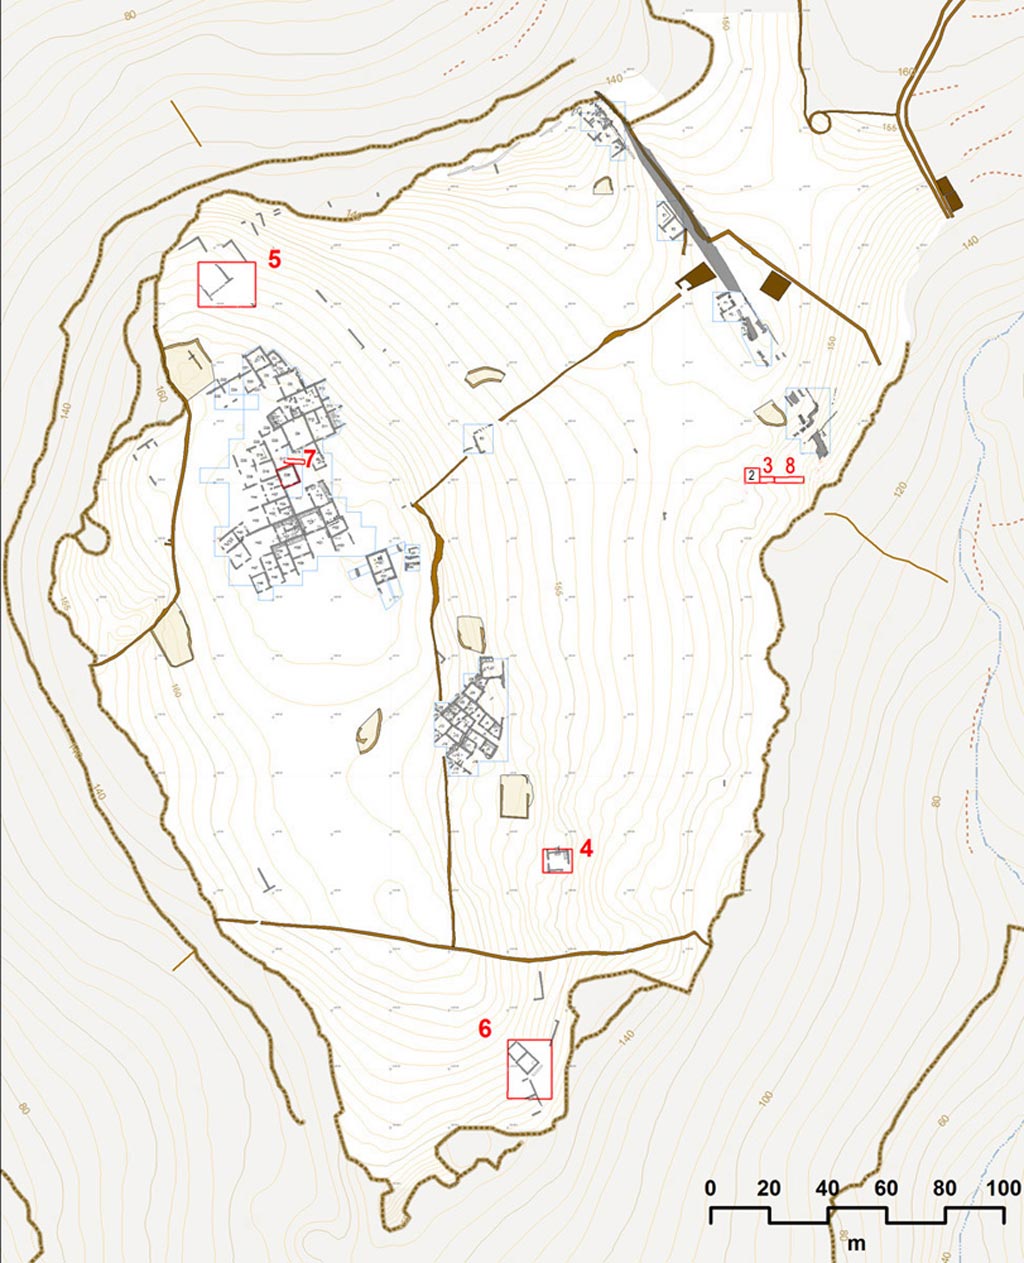 The plan showing the areas being excavated at Zagora in 2014